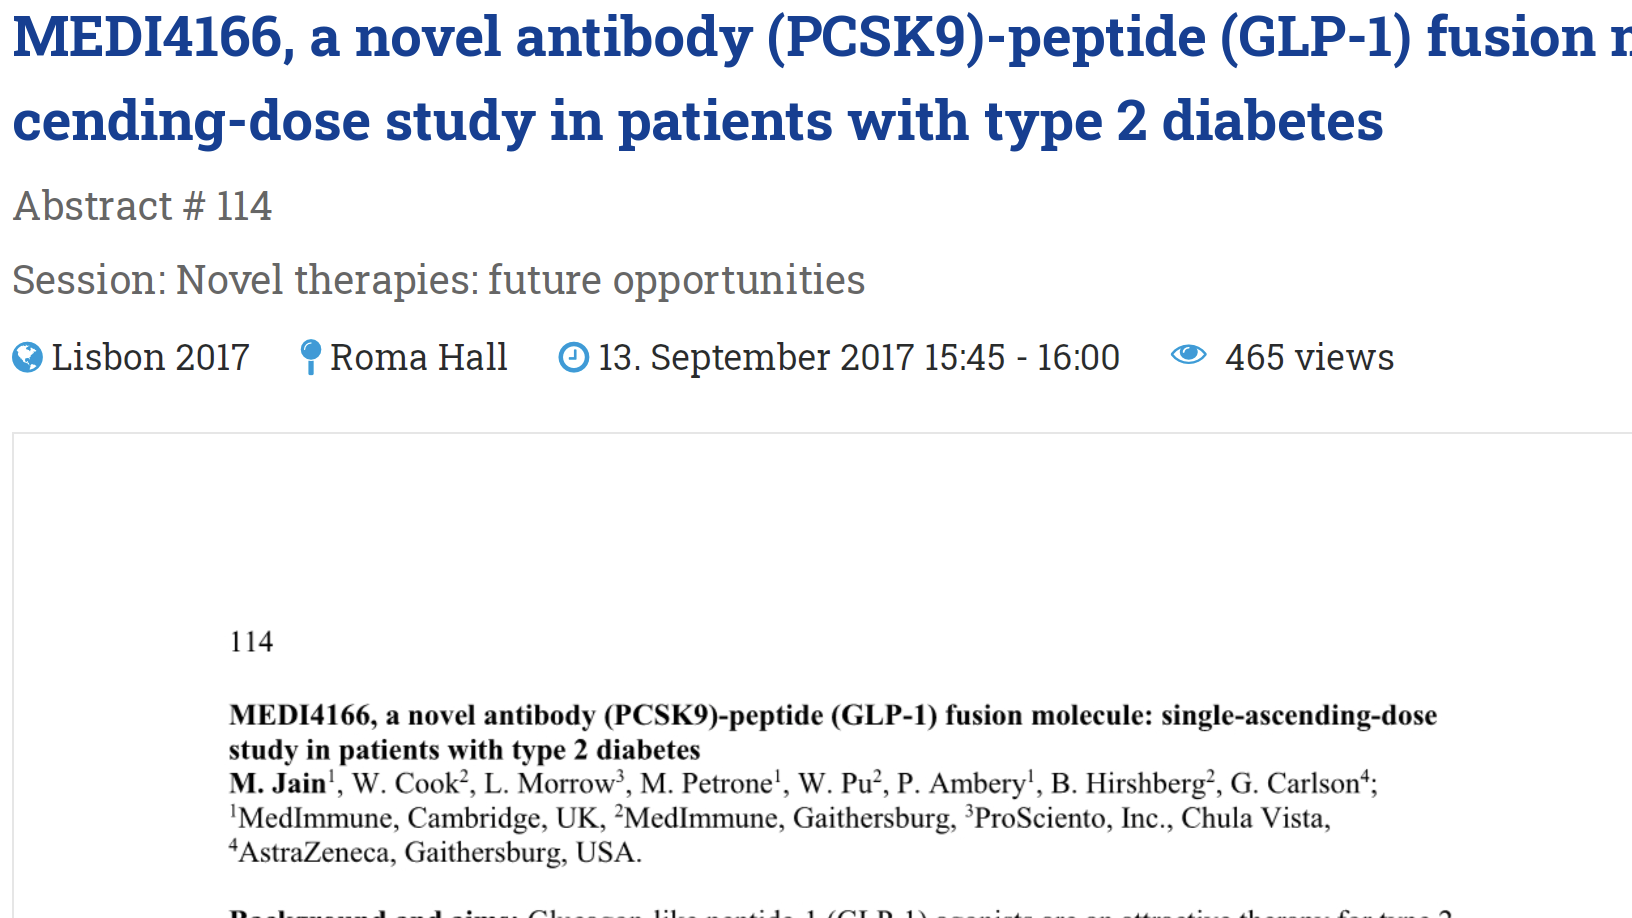 image of MEDI4166, a novel antibody (PCSK9)-peptide (GLP-1) fusion molecule: single-ascending-dose study in patients with type 2 diabetes